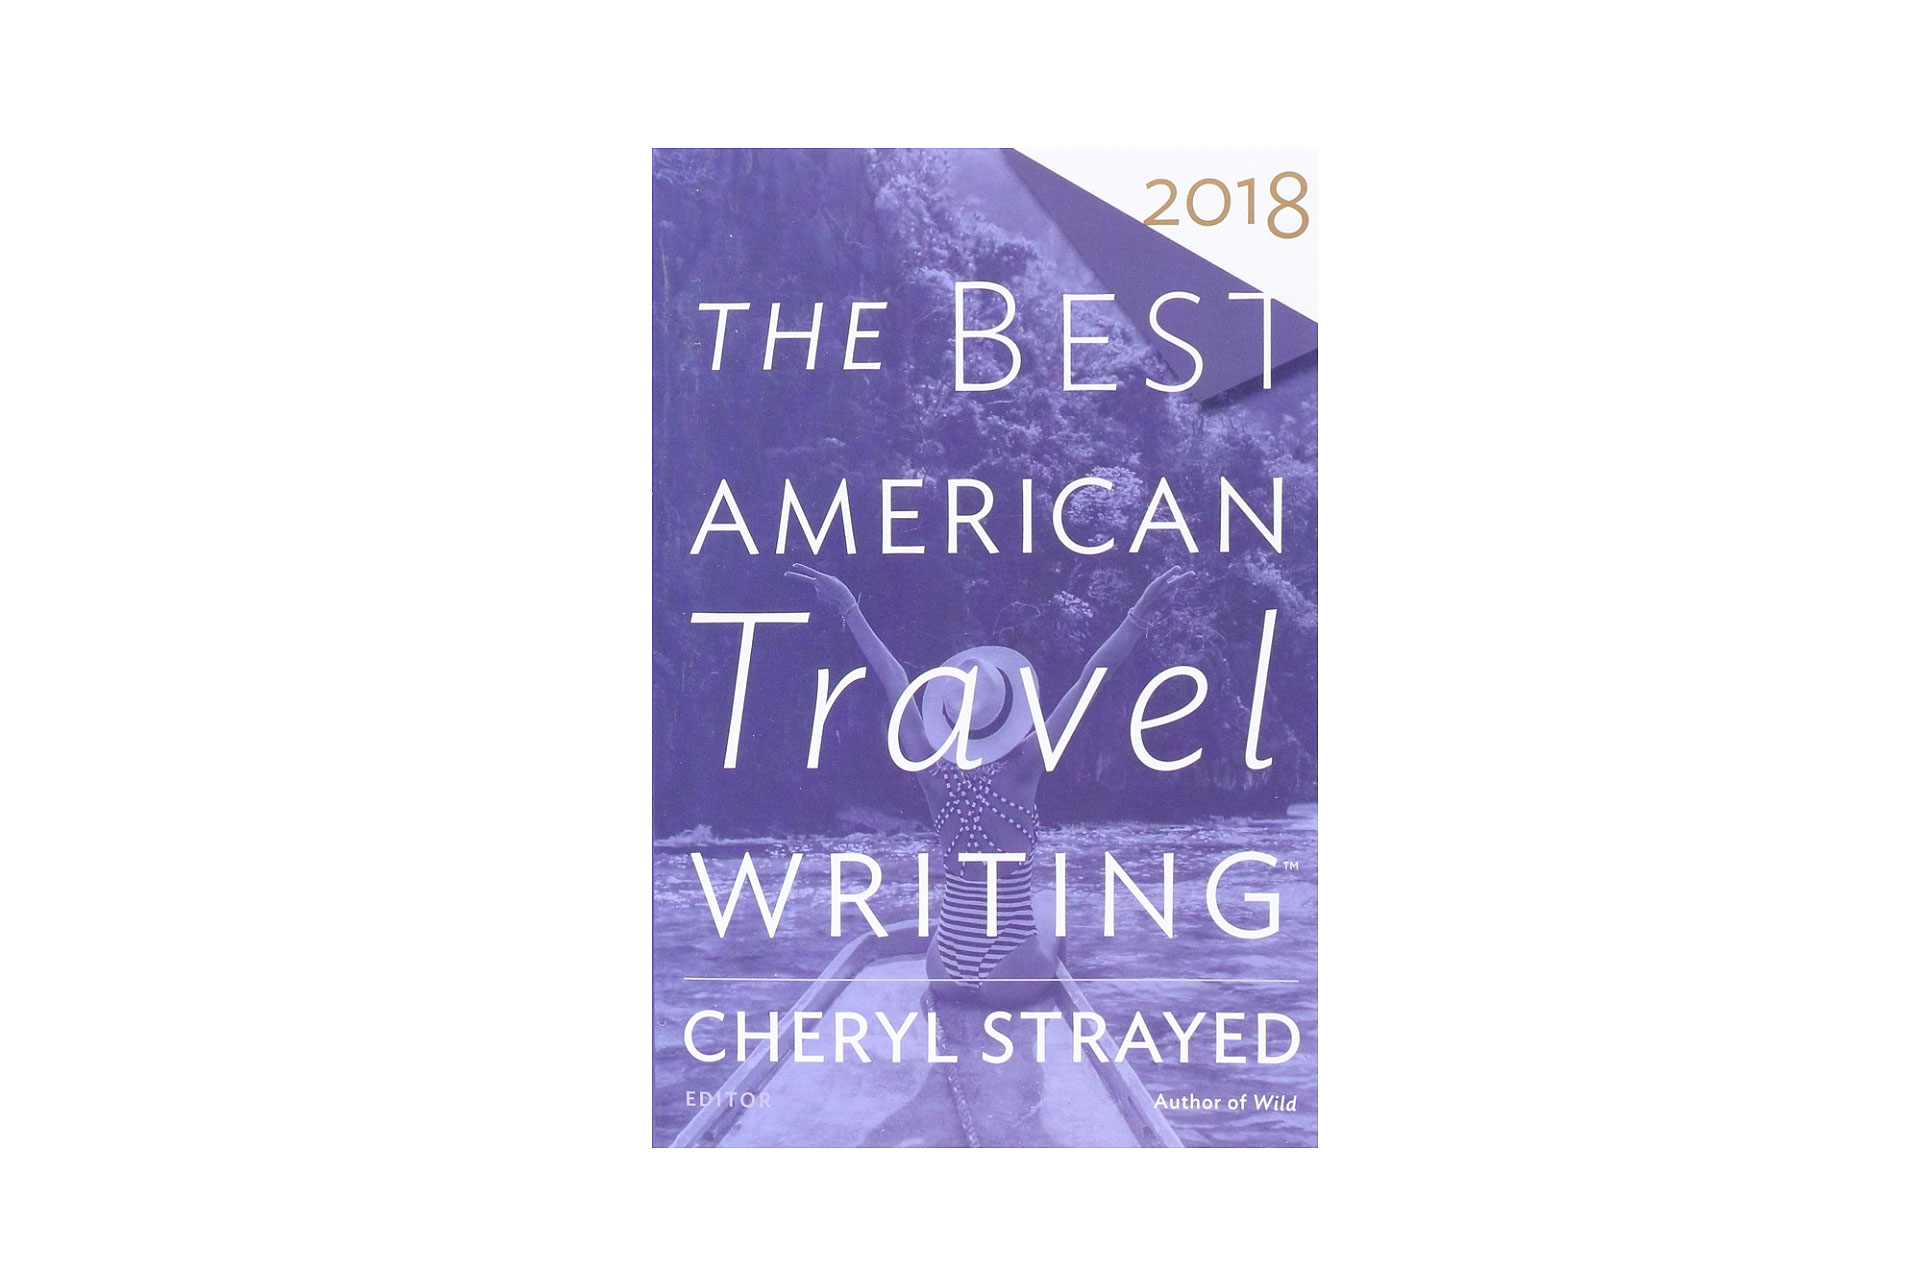 The Best American Travel Writing Book; Courtesy of Amazon